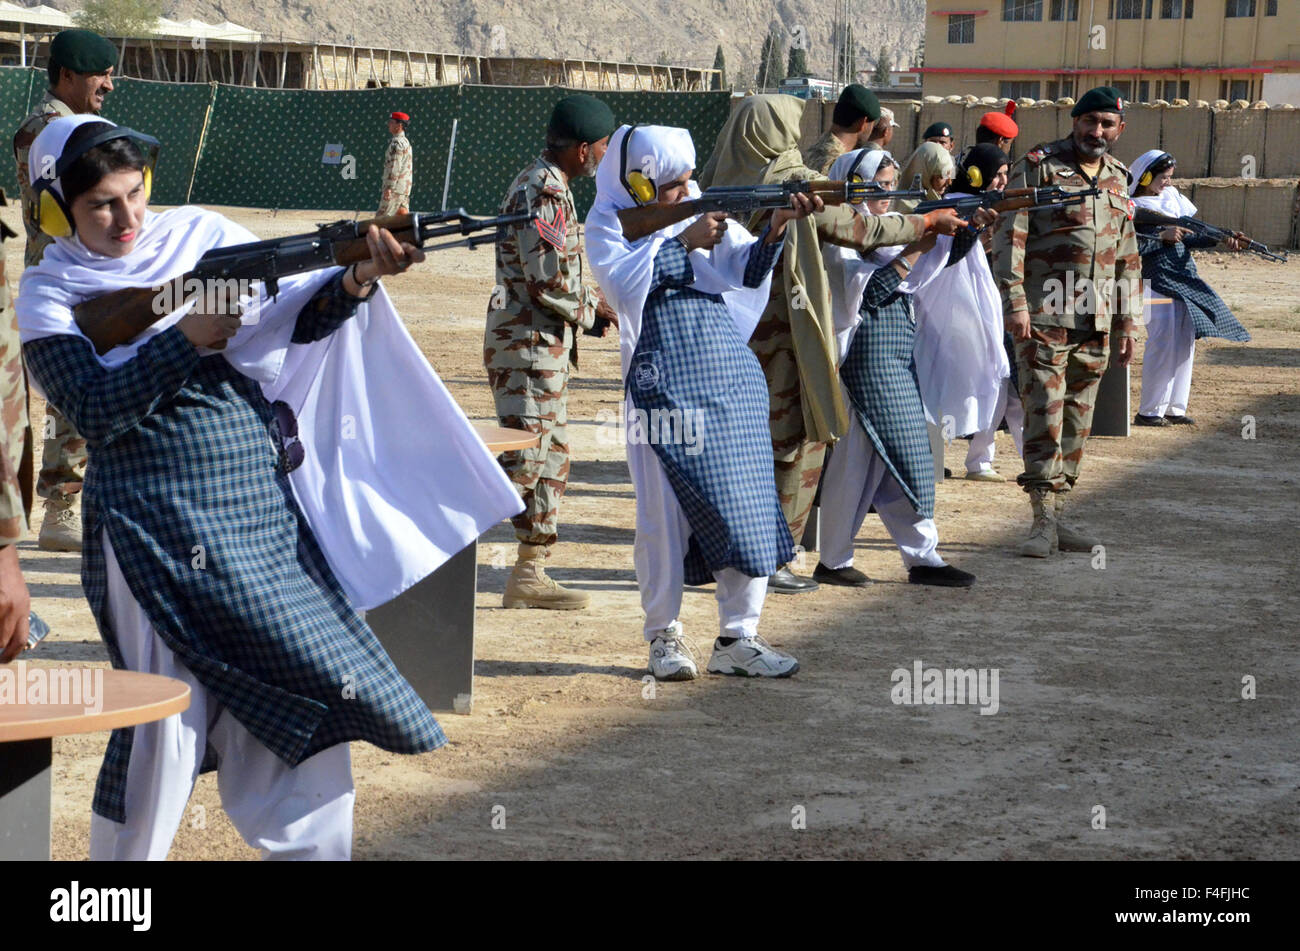 Quetta. 17th Oct, 2015. Female students take part in a weapon training session in southwest Pakistan's Quetta, Oct. 17, 2015. Authorities have commenced special weapon training sessions for female students of Sardar Bahadur Khan Women's University in Quetta. © Irfan/Xinhua/Alamy Live News Stock Photo